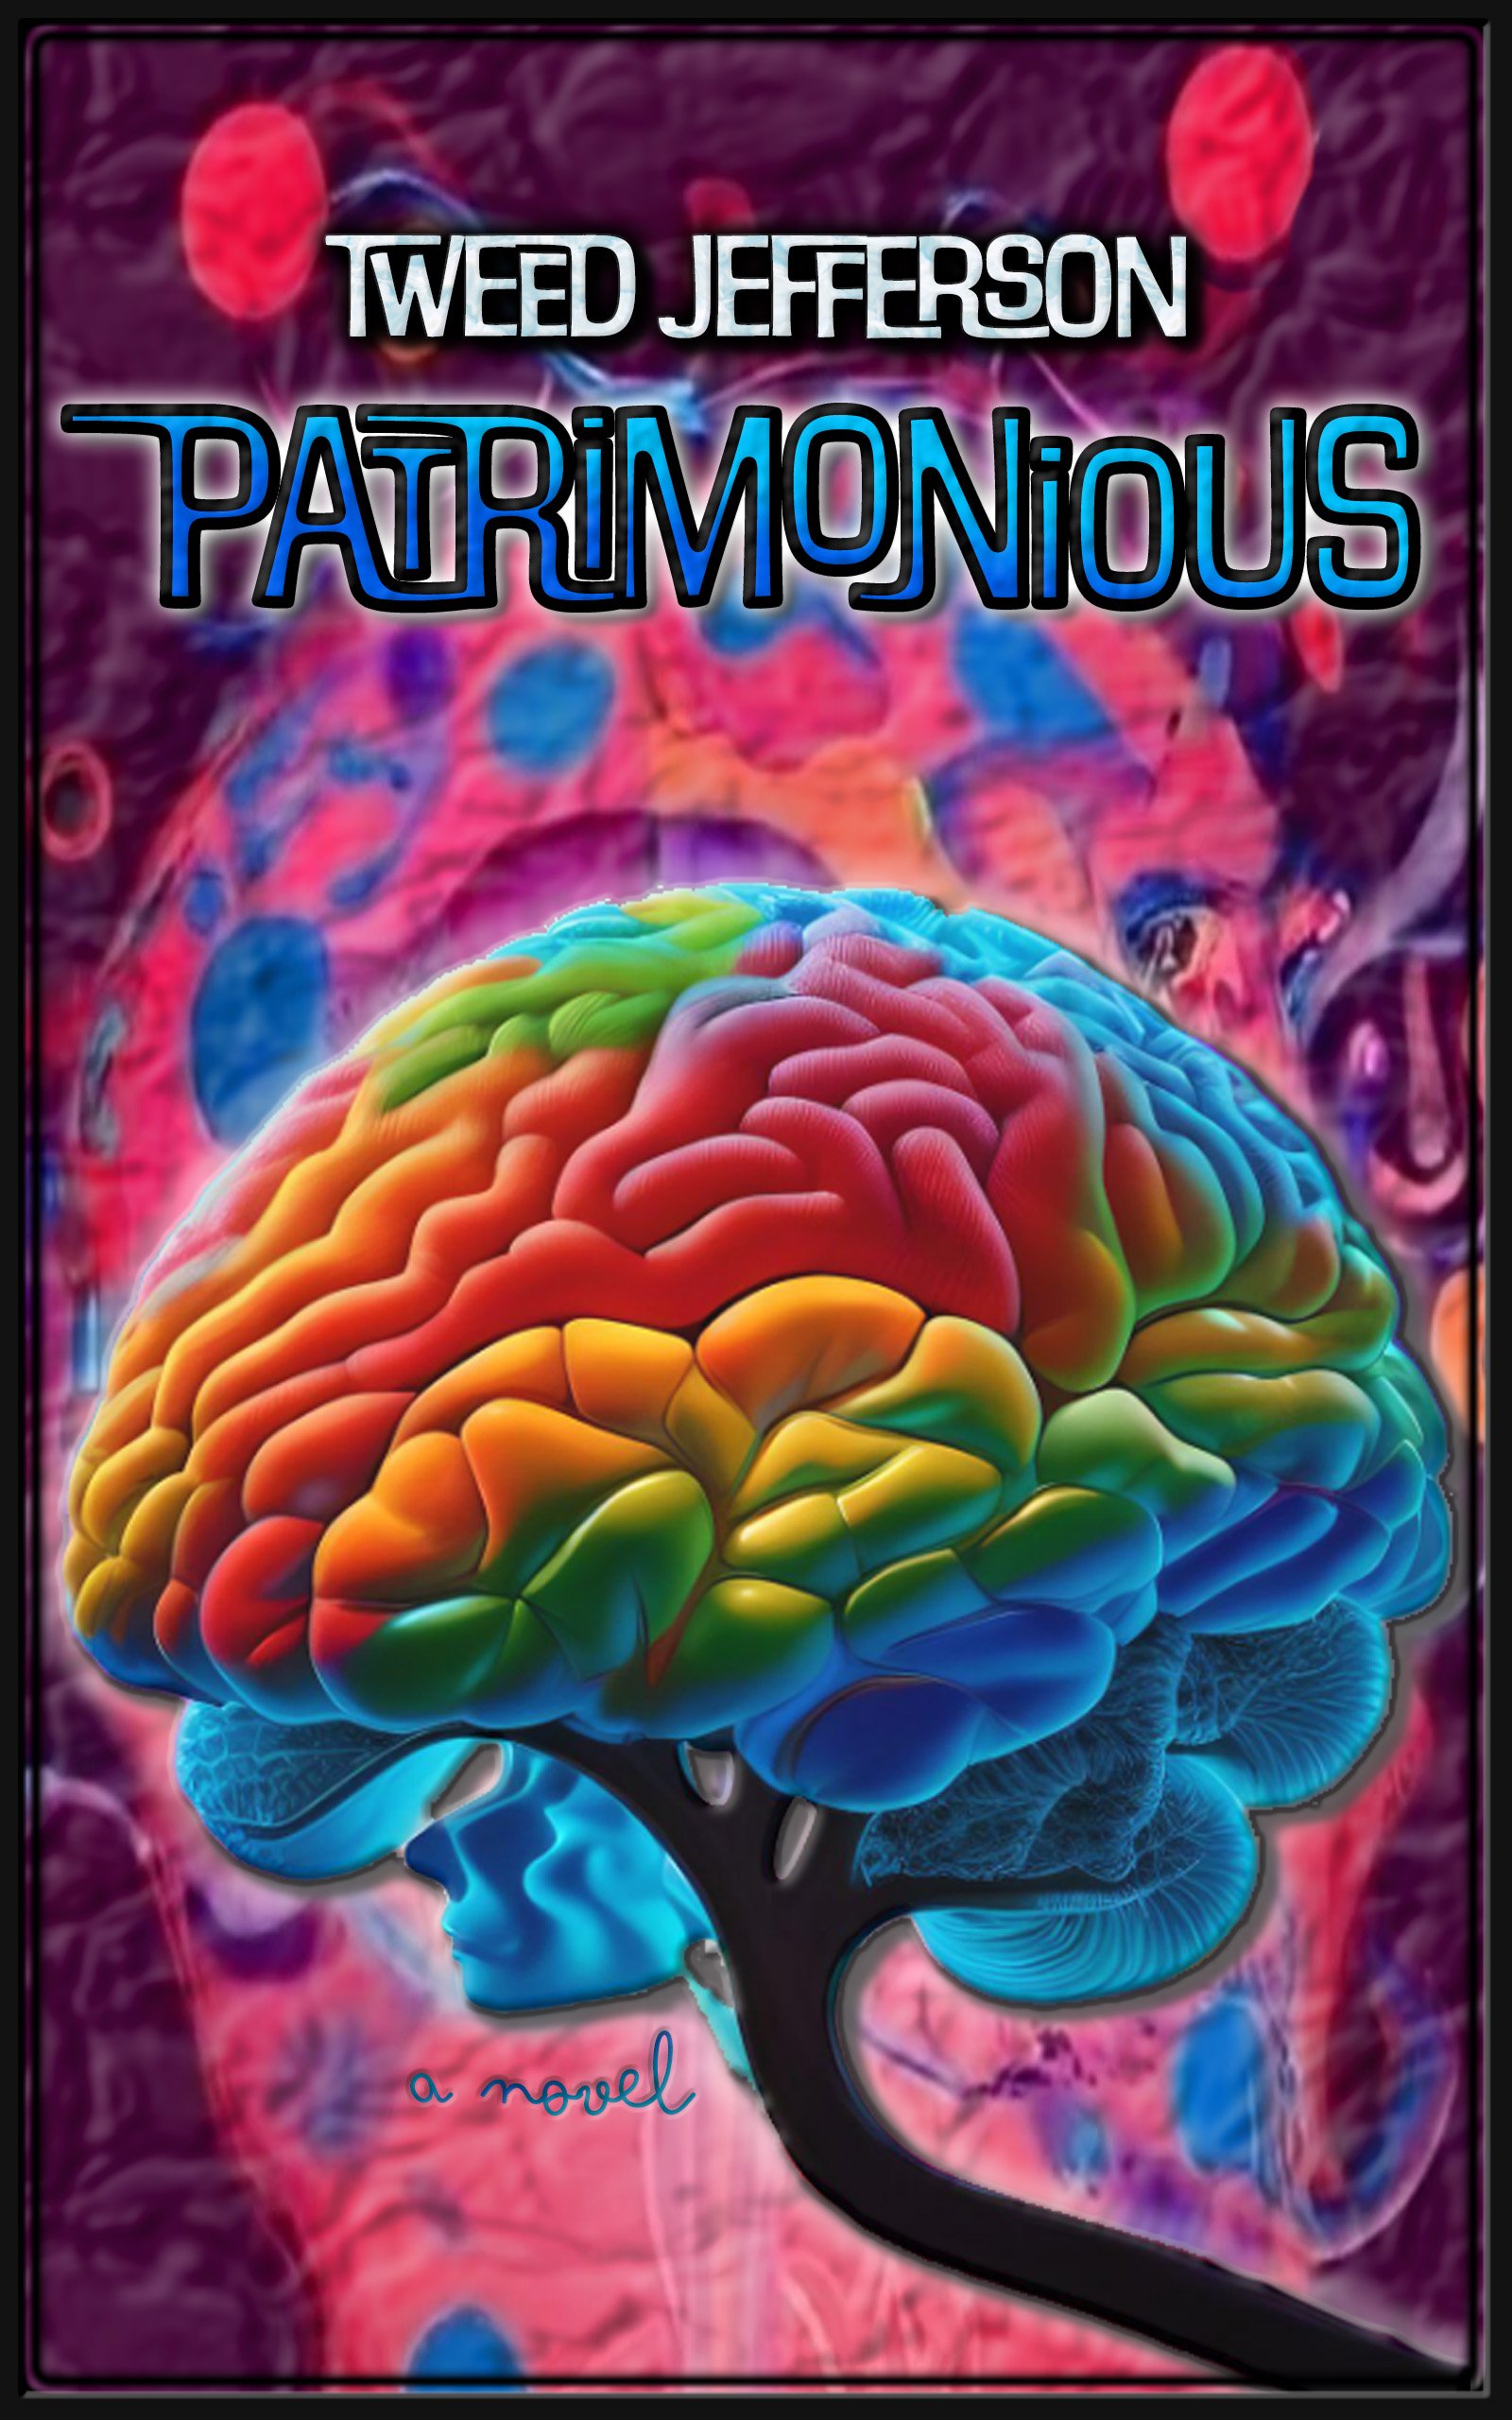 mystery thriller Patrimonious book cover with psychedelic brain